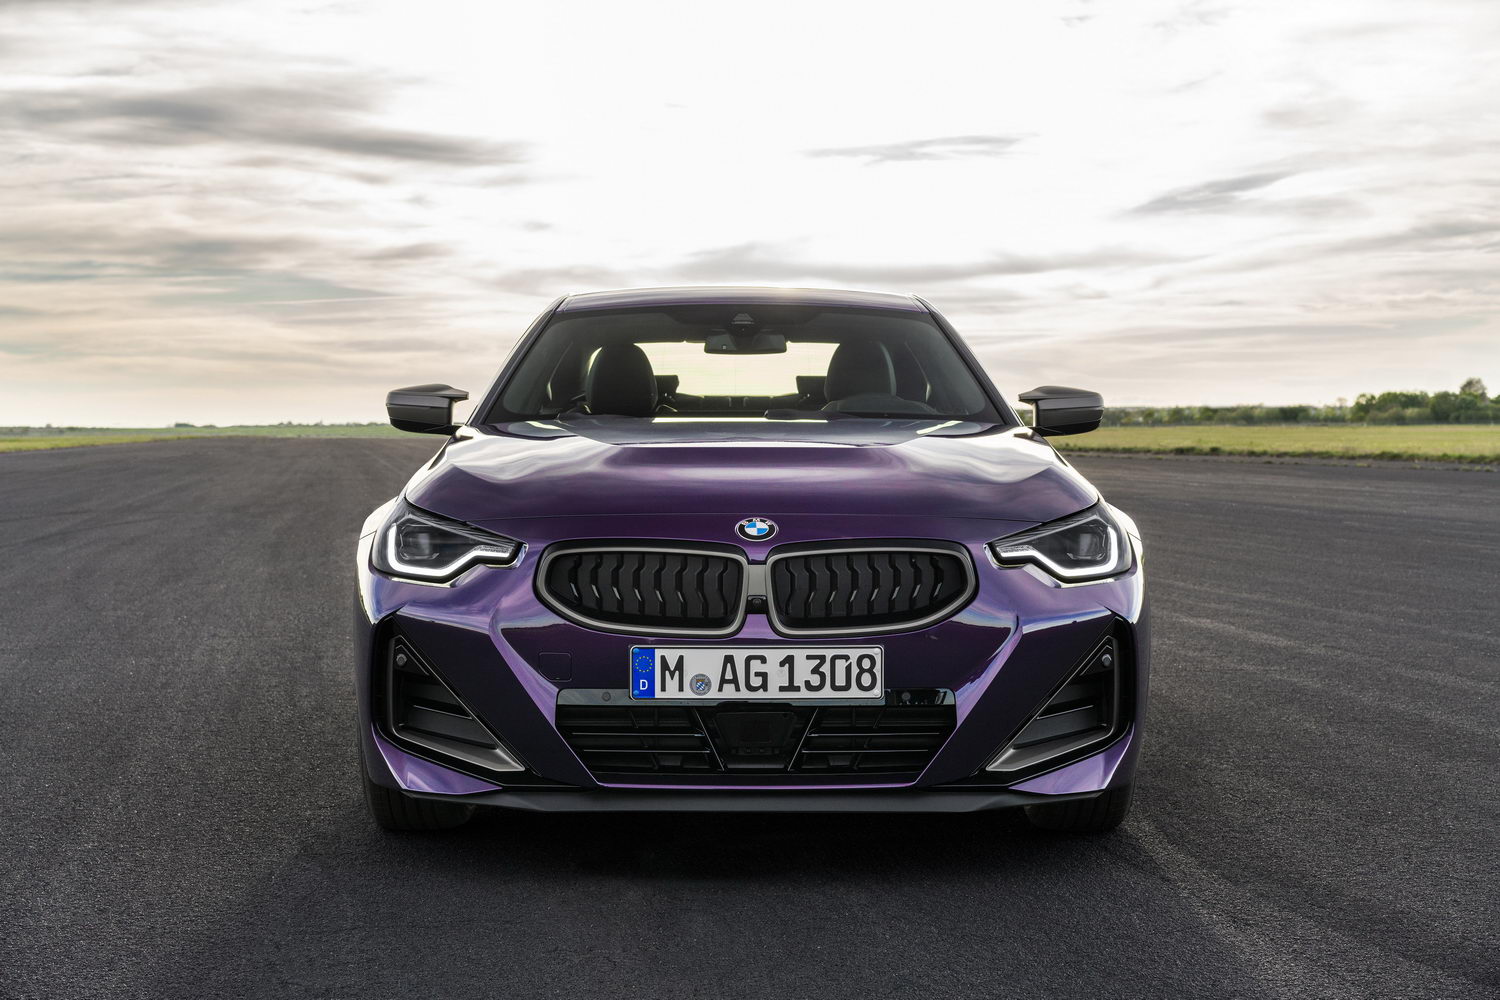 Rapid BMW M240i leads new 2 Series Coupe range. Image by BMW.